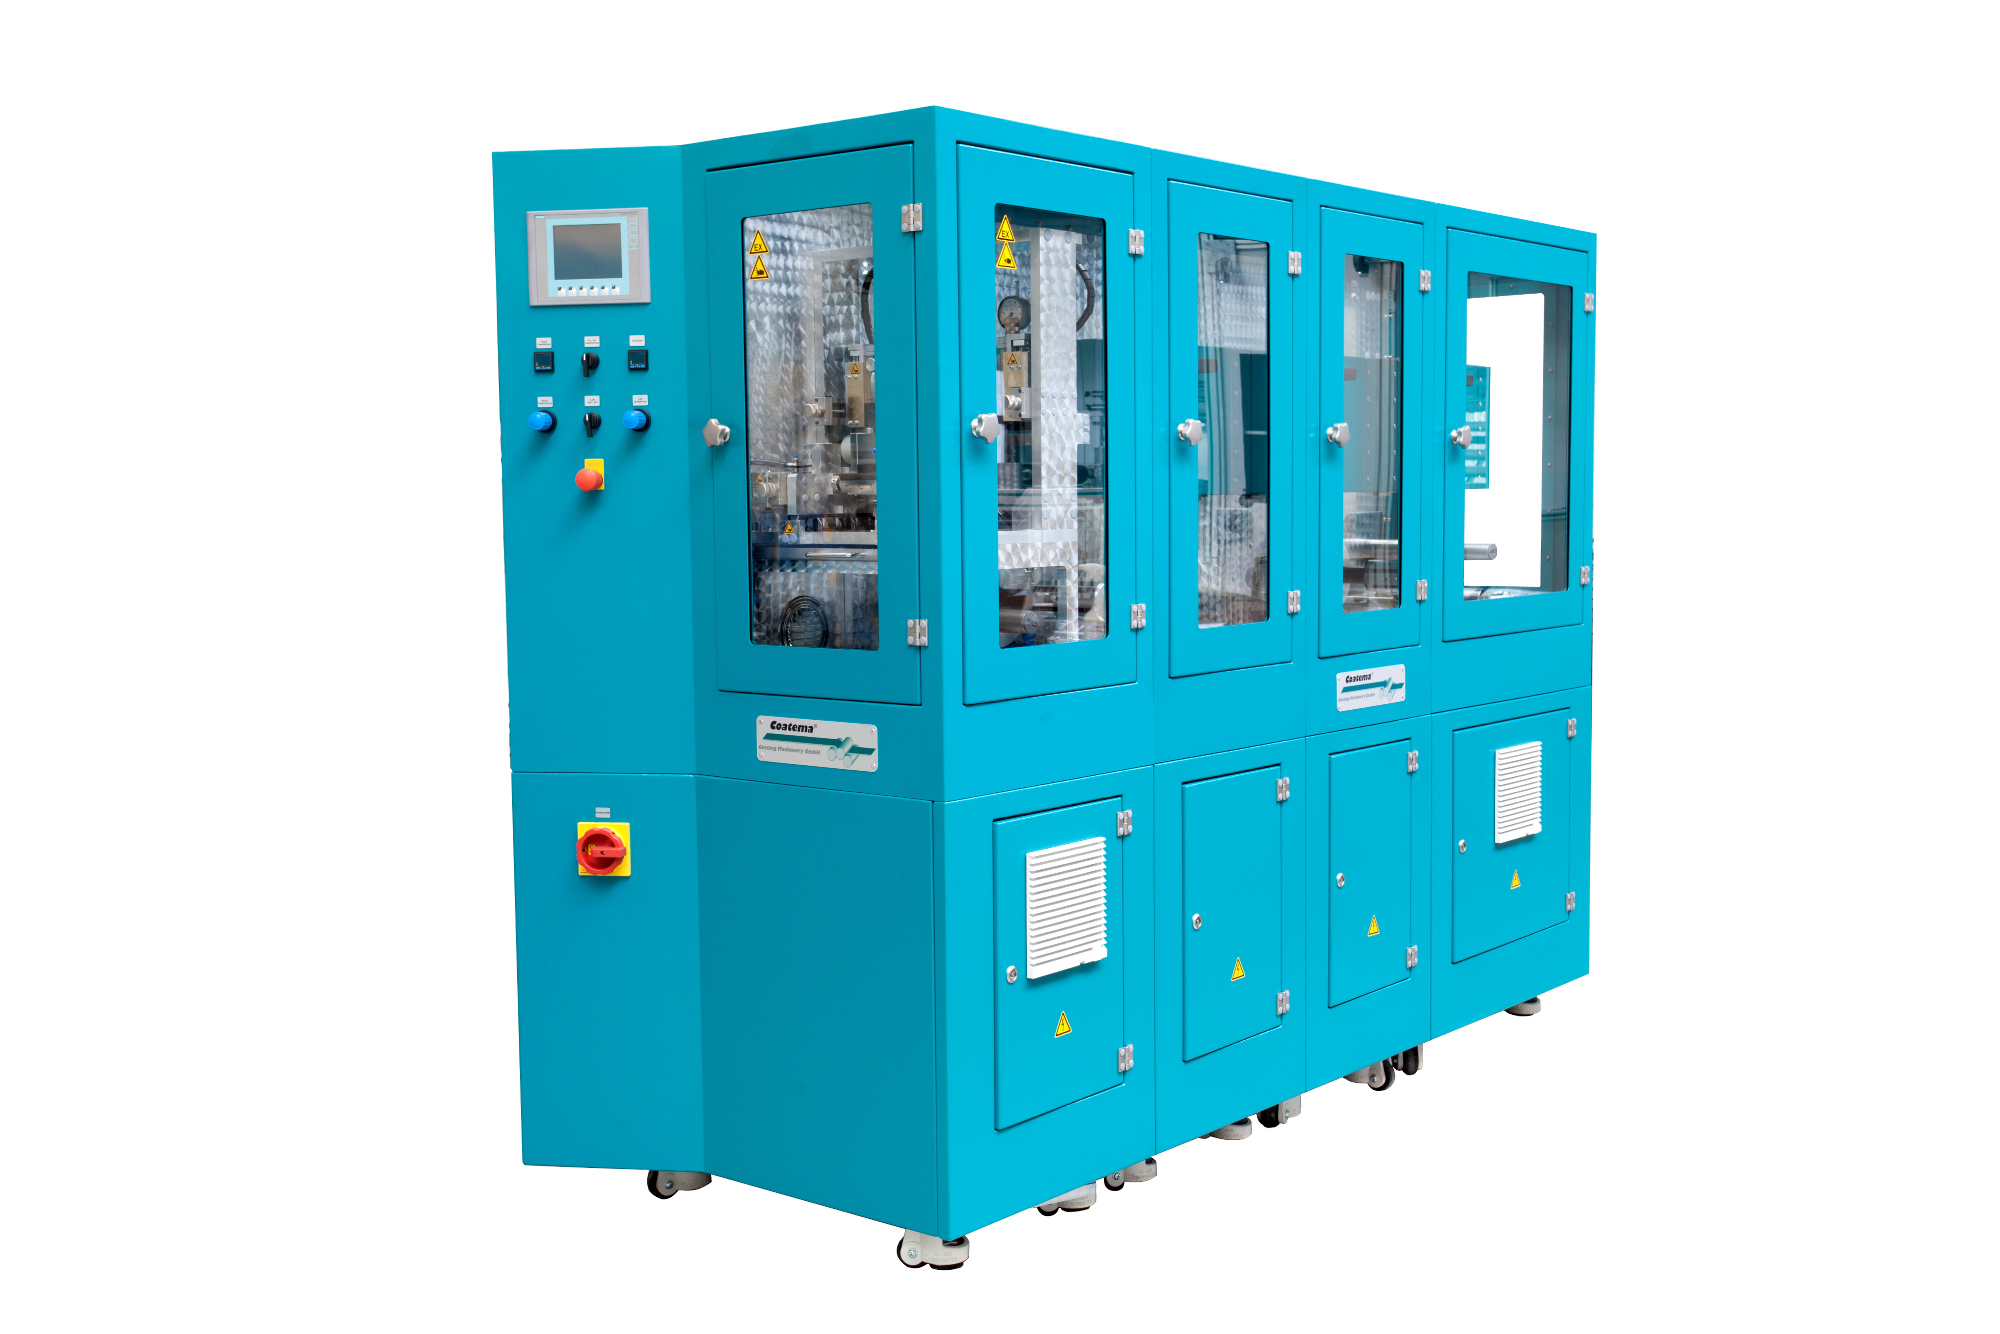 Coatema says it has designed the Smartcoater because early adoption of R2R, at lab or pilot phases, can make scaleup to a full production process easier and less costly.